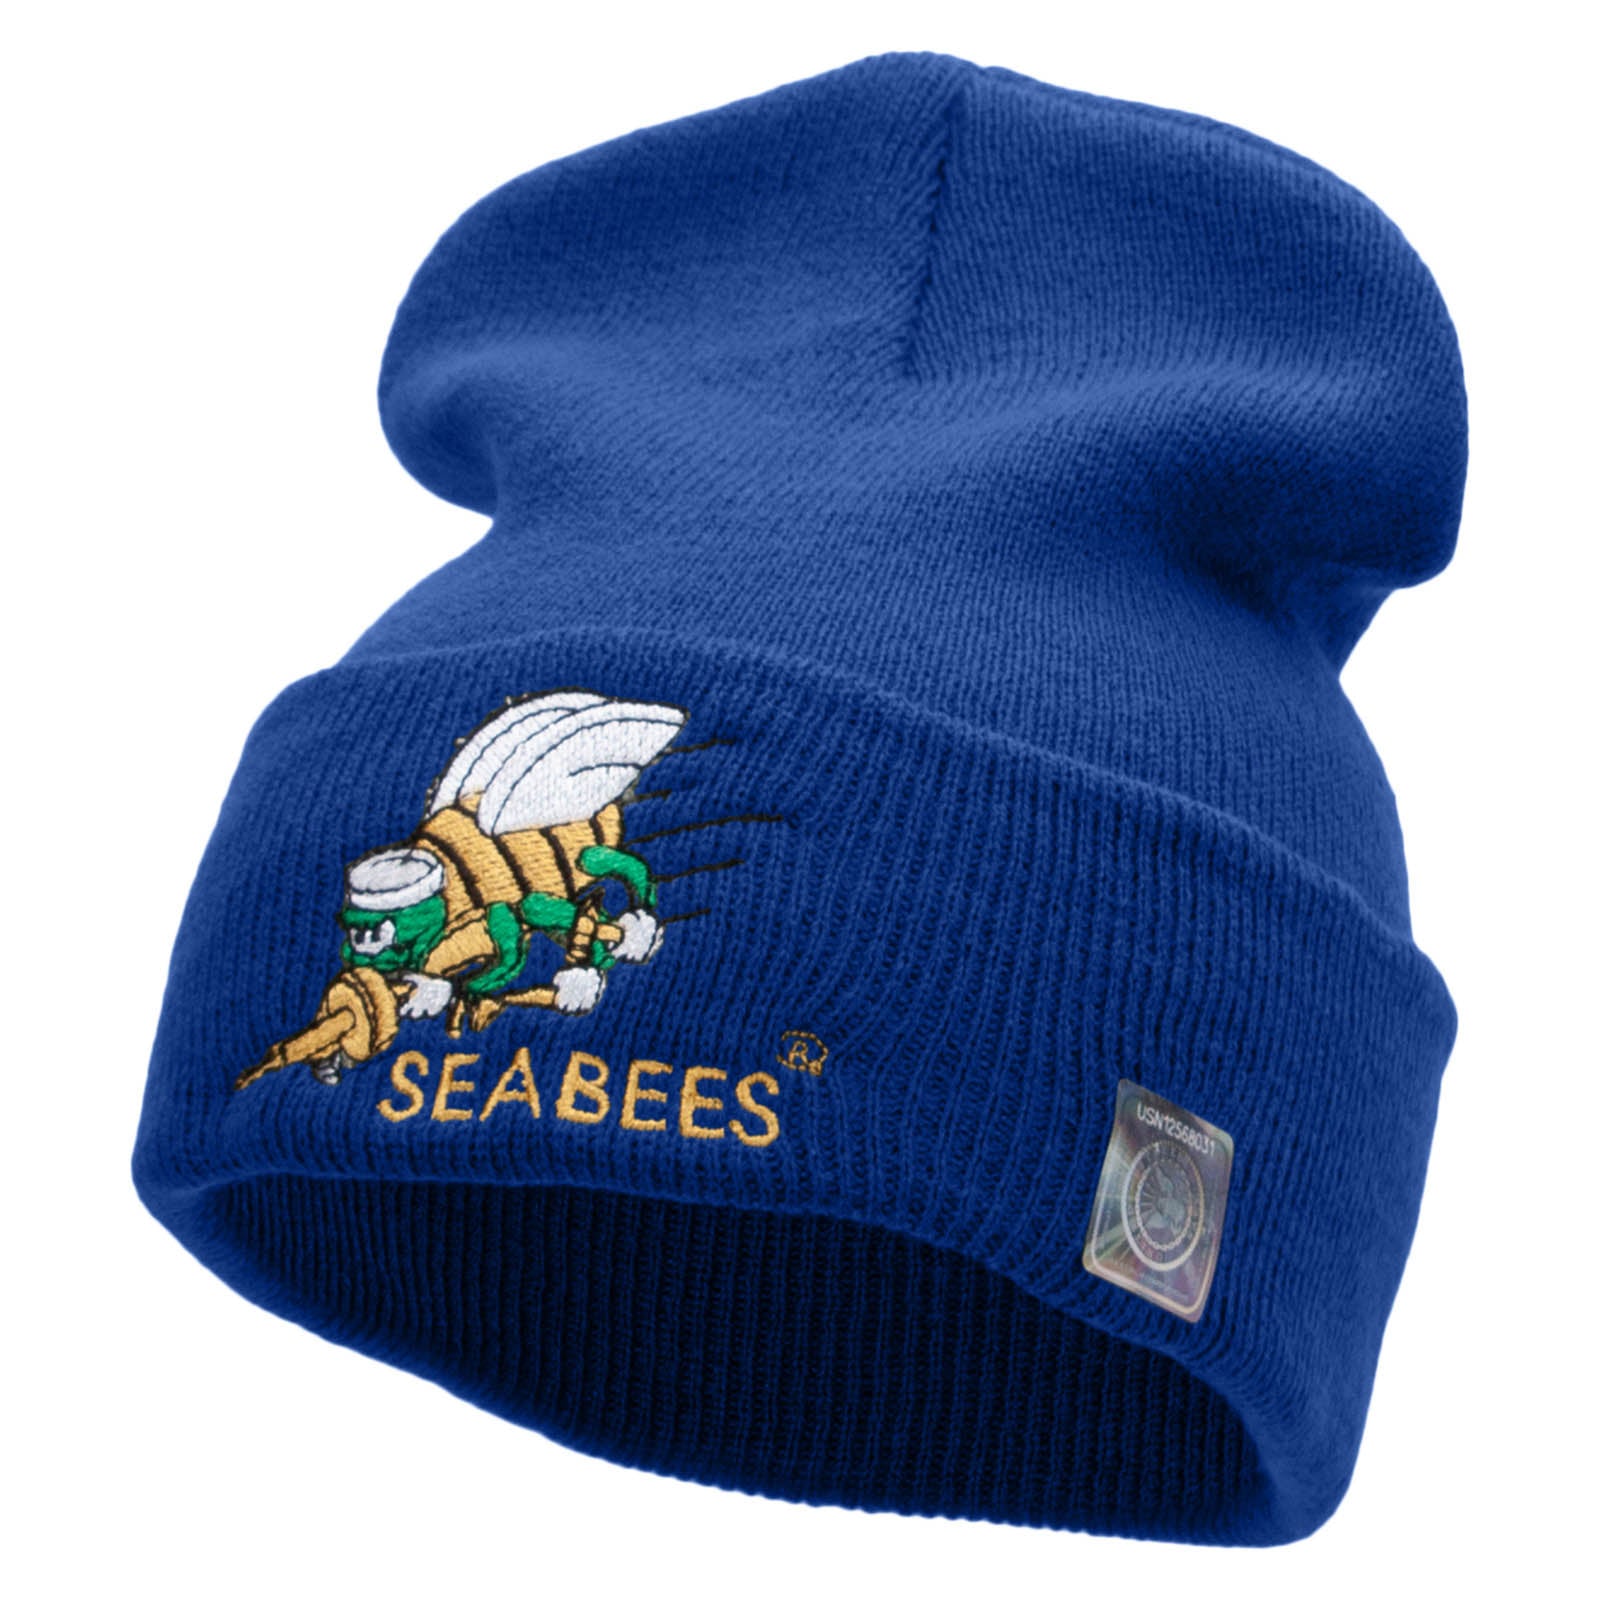 Licensed Navy Seabees Symbol Embroidered Cuff Long Beanie Made in USA - Royal OSFM